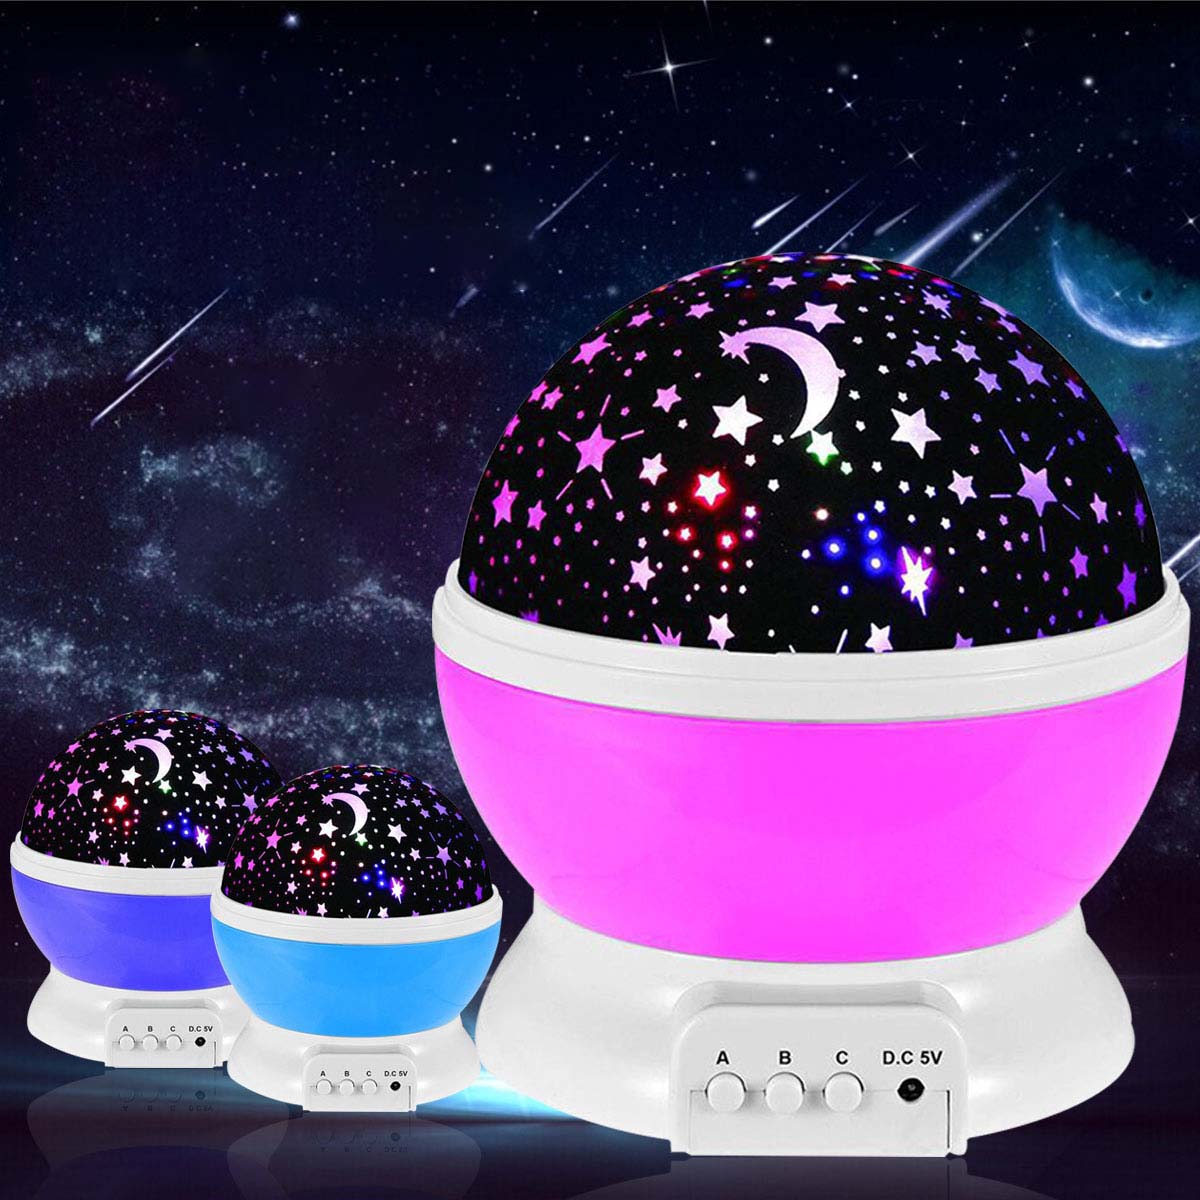 Find LED Starry Projector Lamp Baby Night Light USB Romantic Rotating Moon Cosmos Sky Star Projection Lamp For Kids Baby Bedroom Living Room for Sale on Gipsybee.com with cryptocurrencies